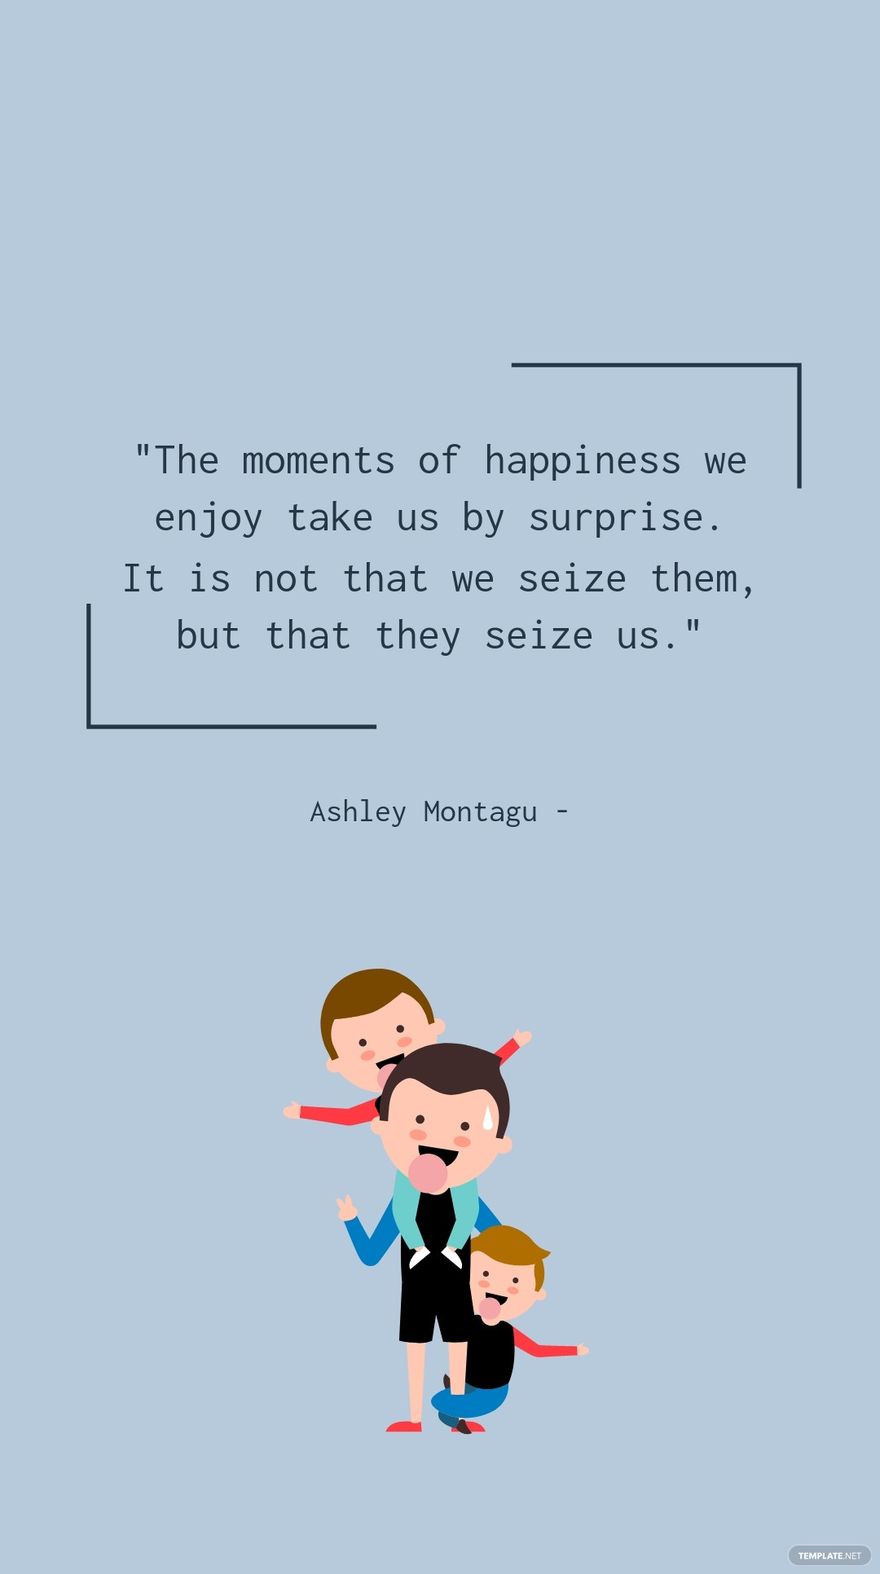 Ashley Montagu - The moments of happiness we enjoy take us by surprise. It is not that we seize them, but that they seize us.